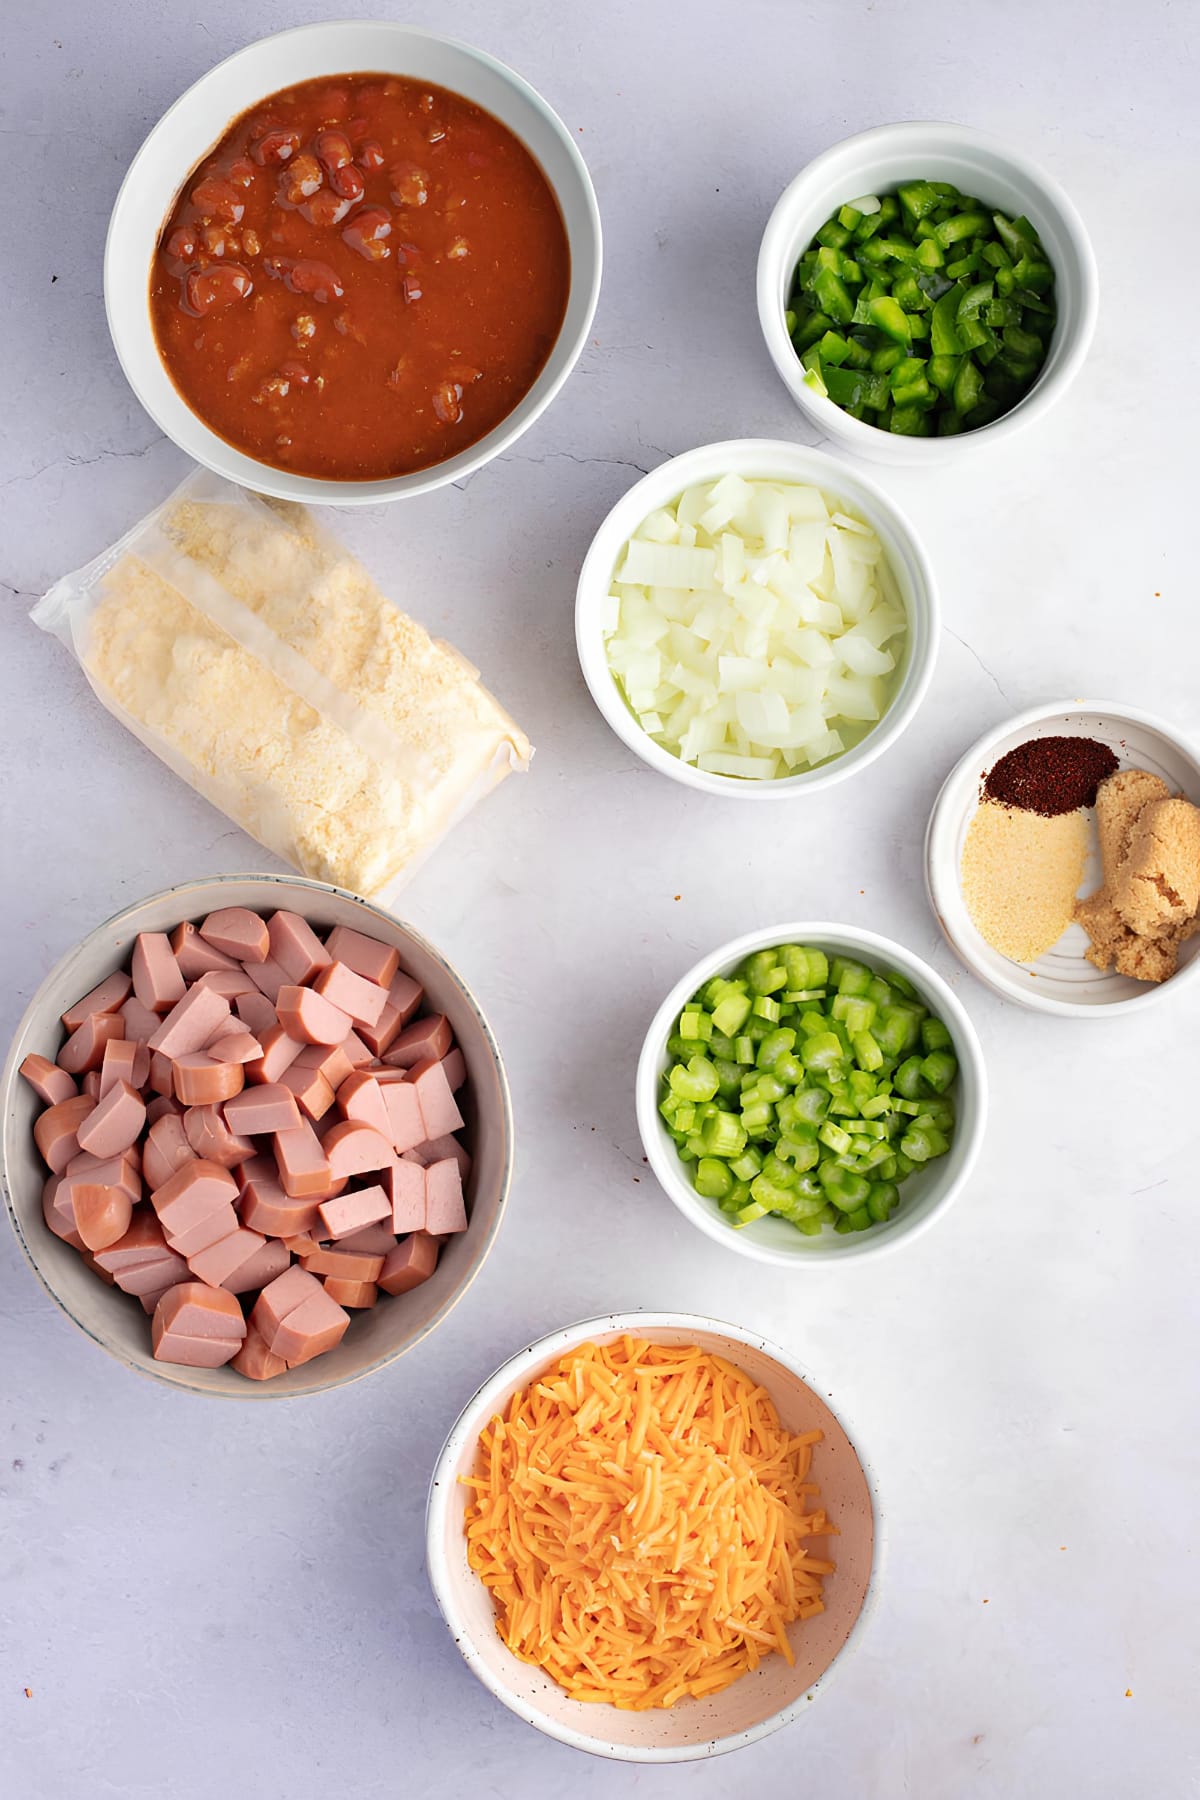 Bowls of chopped green pepper, onion, celery, chili with beans, bite-sized hotdogs, shredded cheese, a saucer of garlic powder, chili powder, sugar and a pack of cornbread or muffin mix